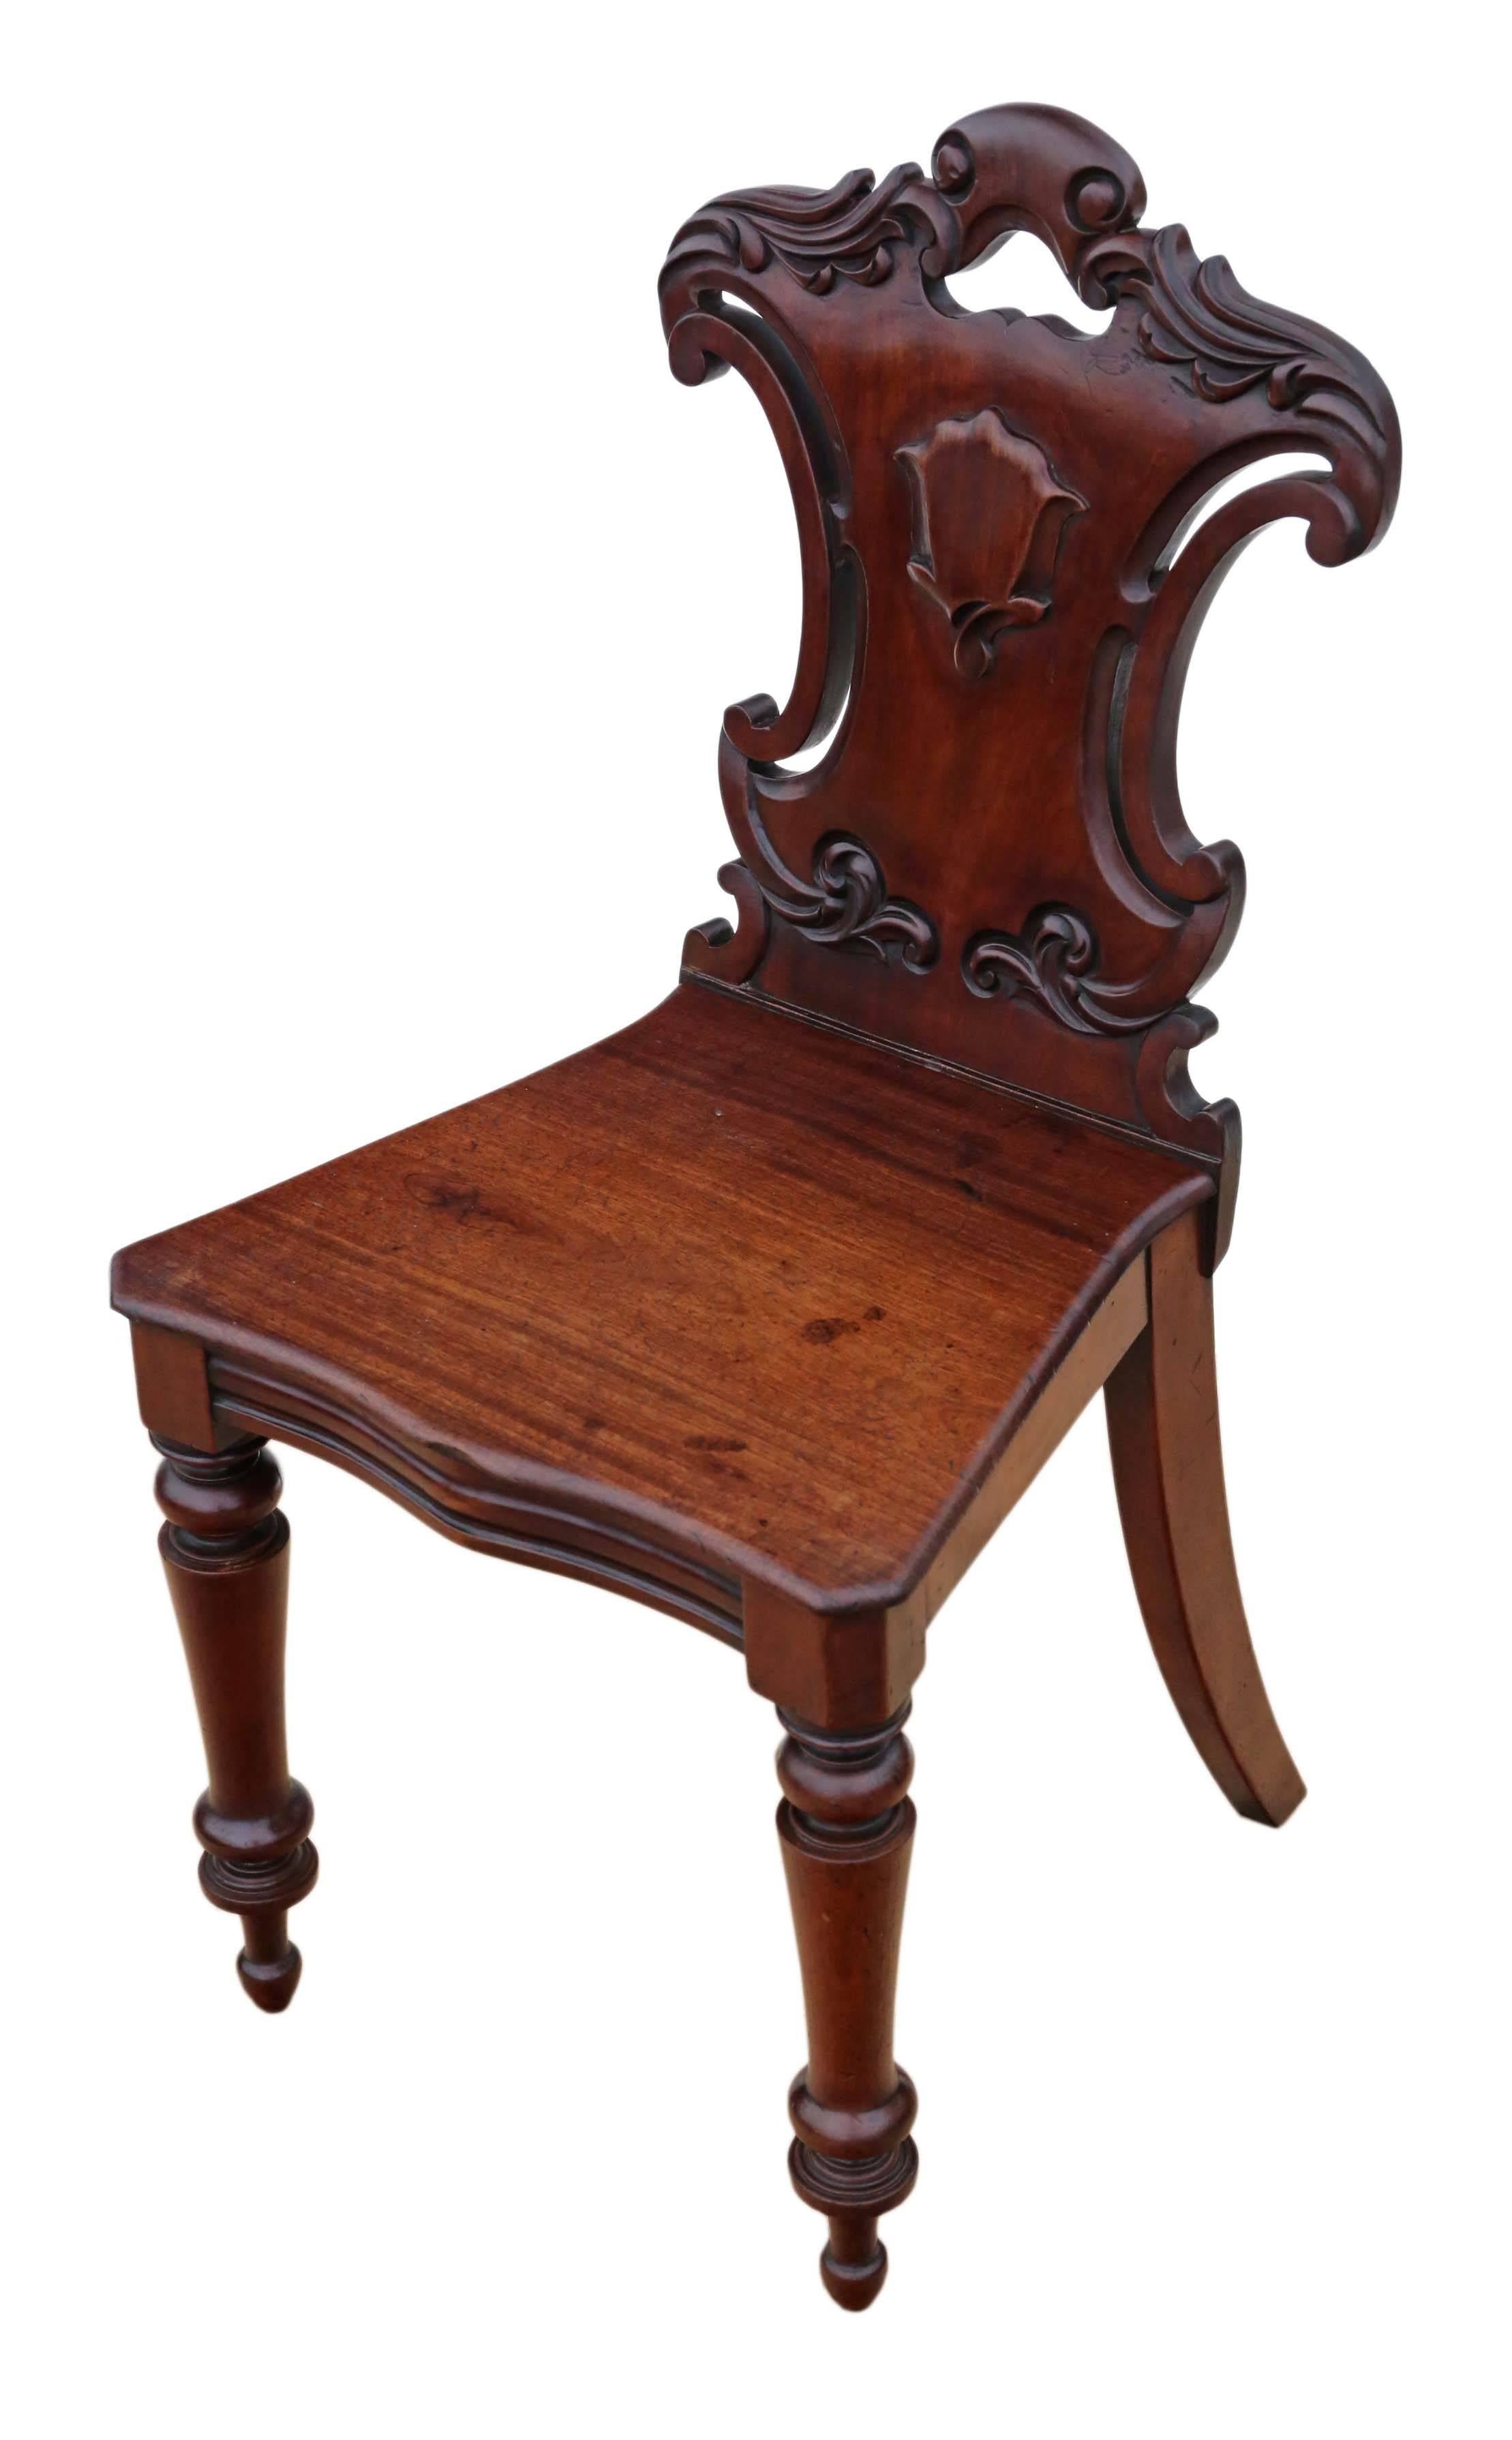 Antique Victorian circa 1850-1870 carved mahogany hall chair.

A great rare find, with nice colour, age, patina and charm. Very decorative.

No loose joints.

Overall maximum dimensions:

43cm W x 45cm D x 86cm H (43cm H seat).

Historic